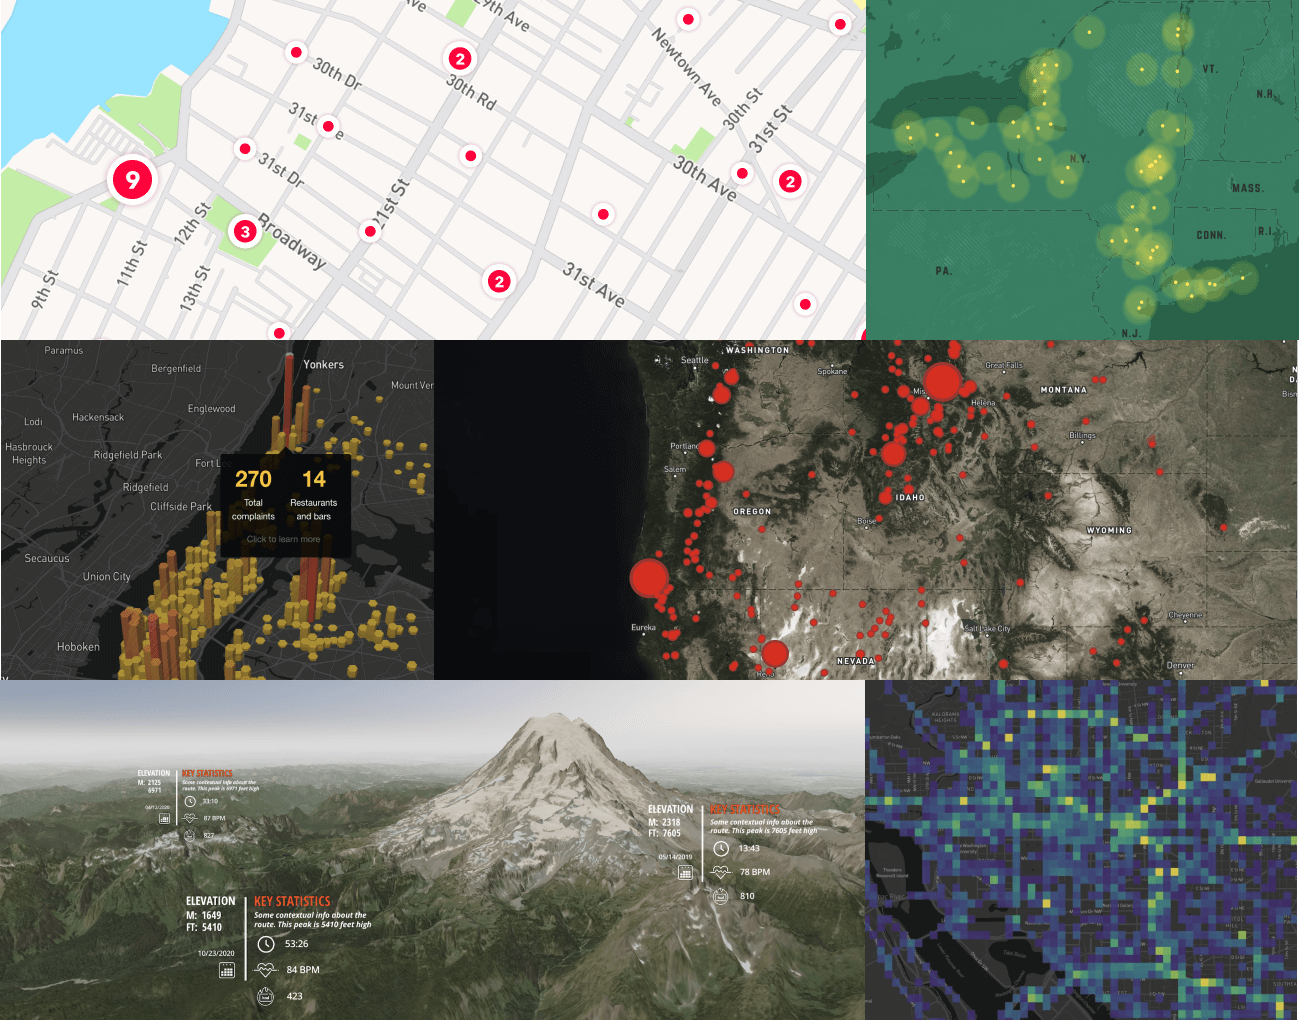 Mapbox GL JS gallery of map images